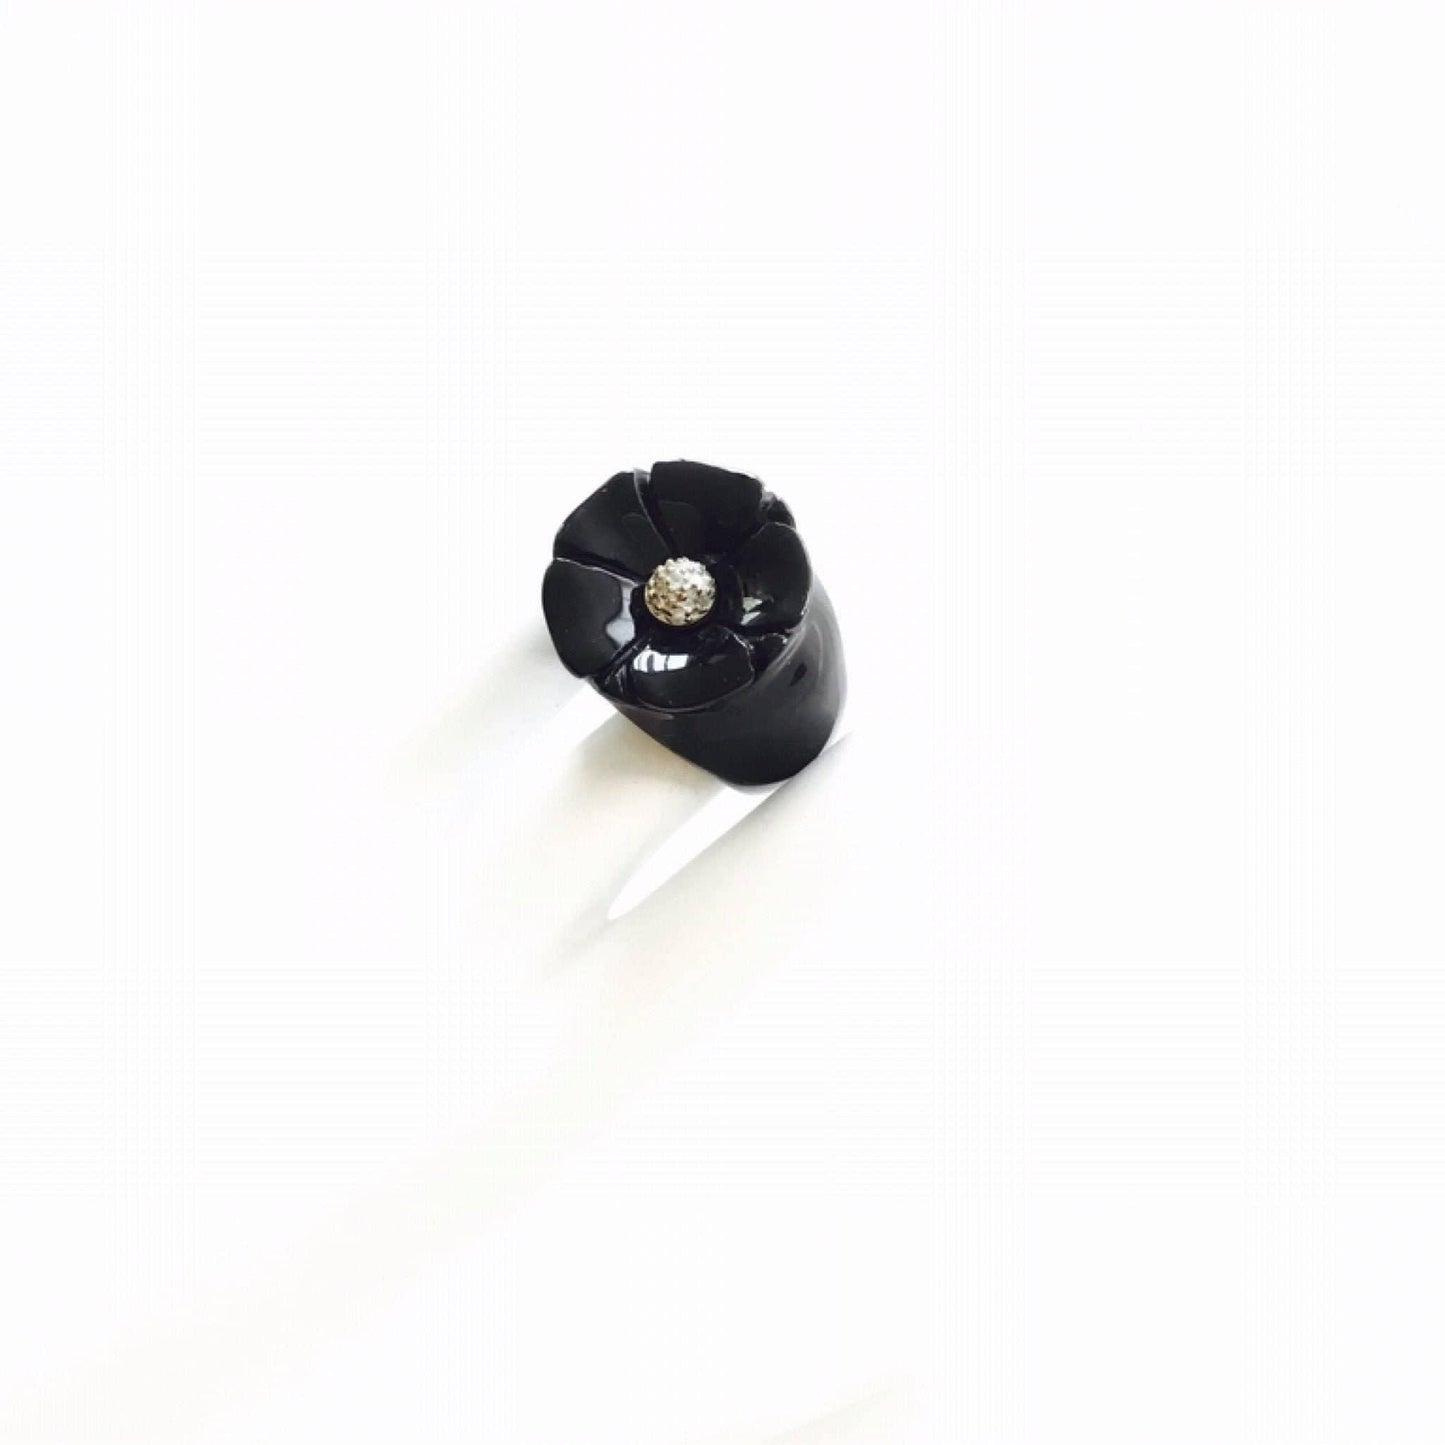 Exceptional Quality Black Onyx Cocktail Ring